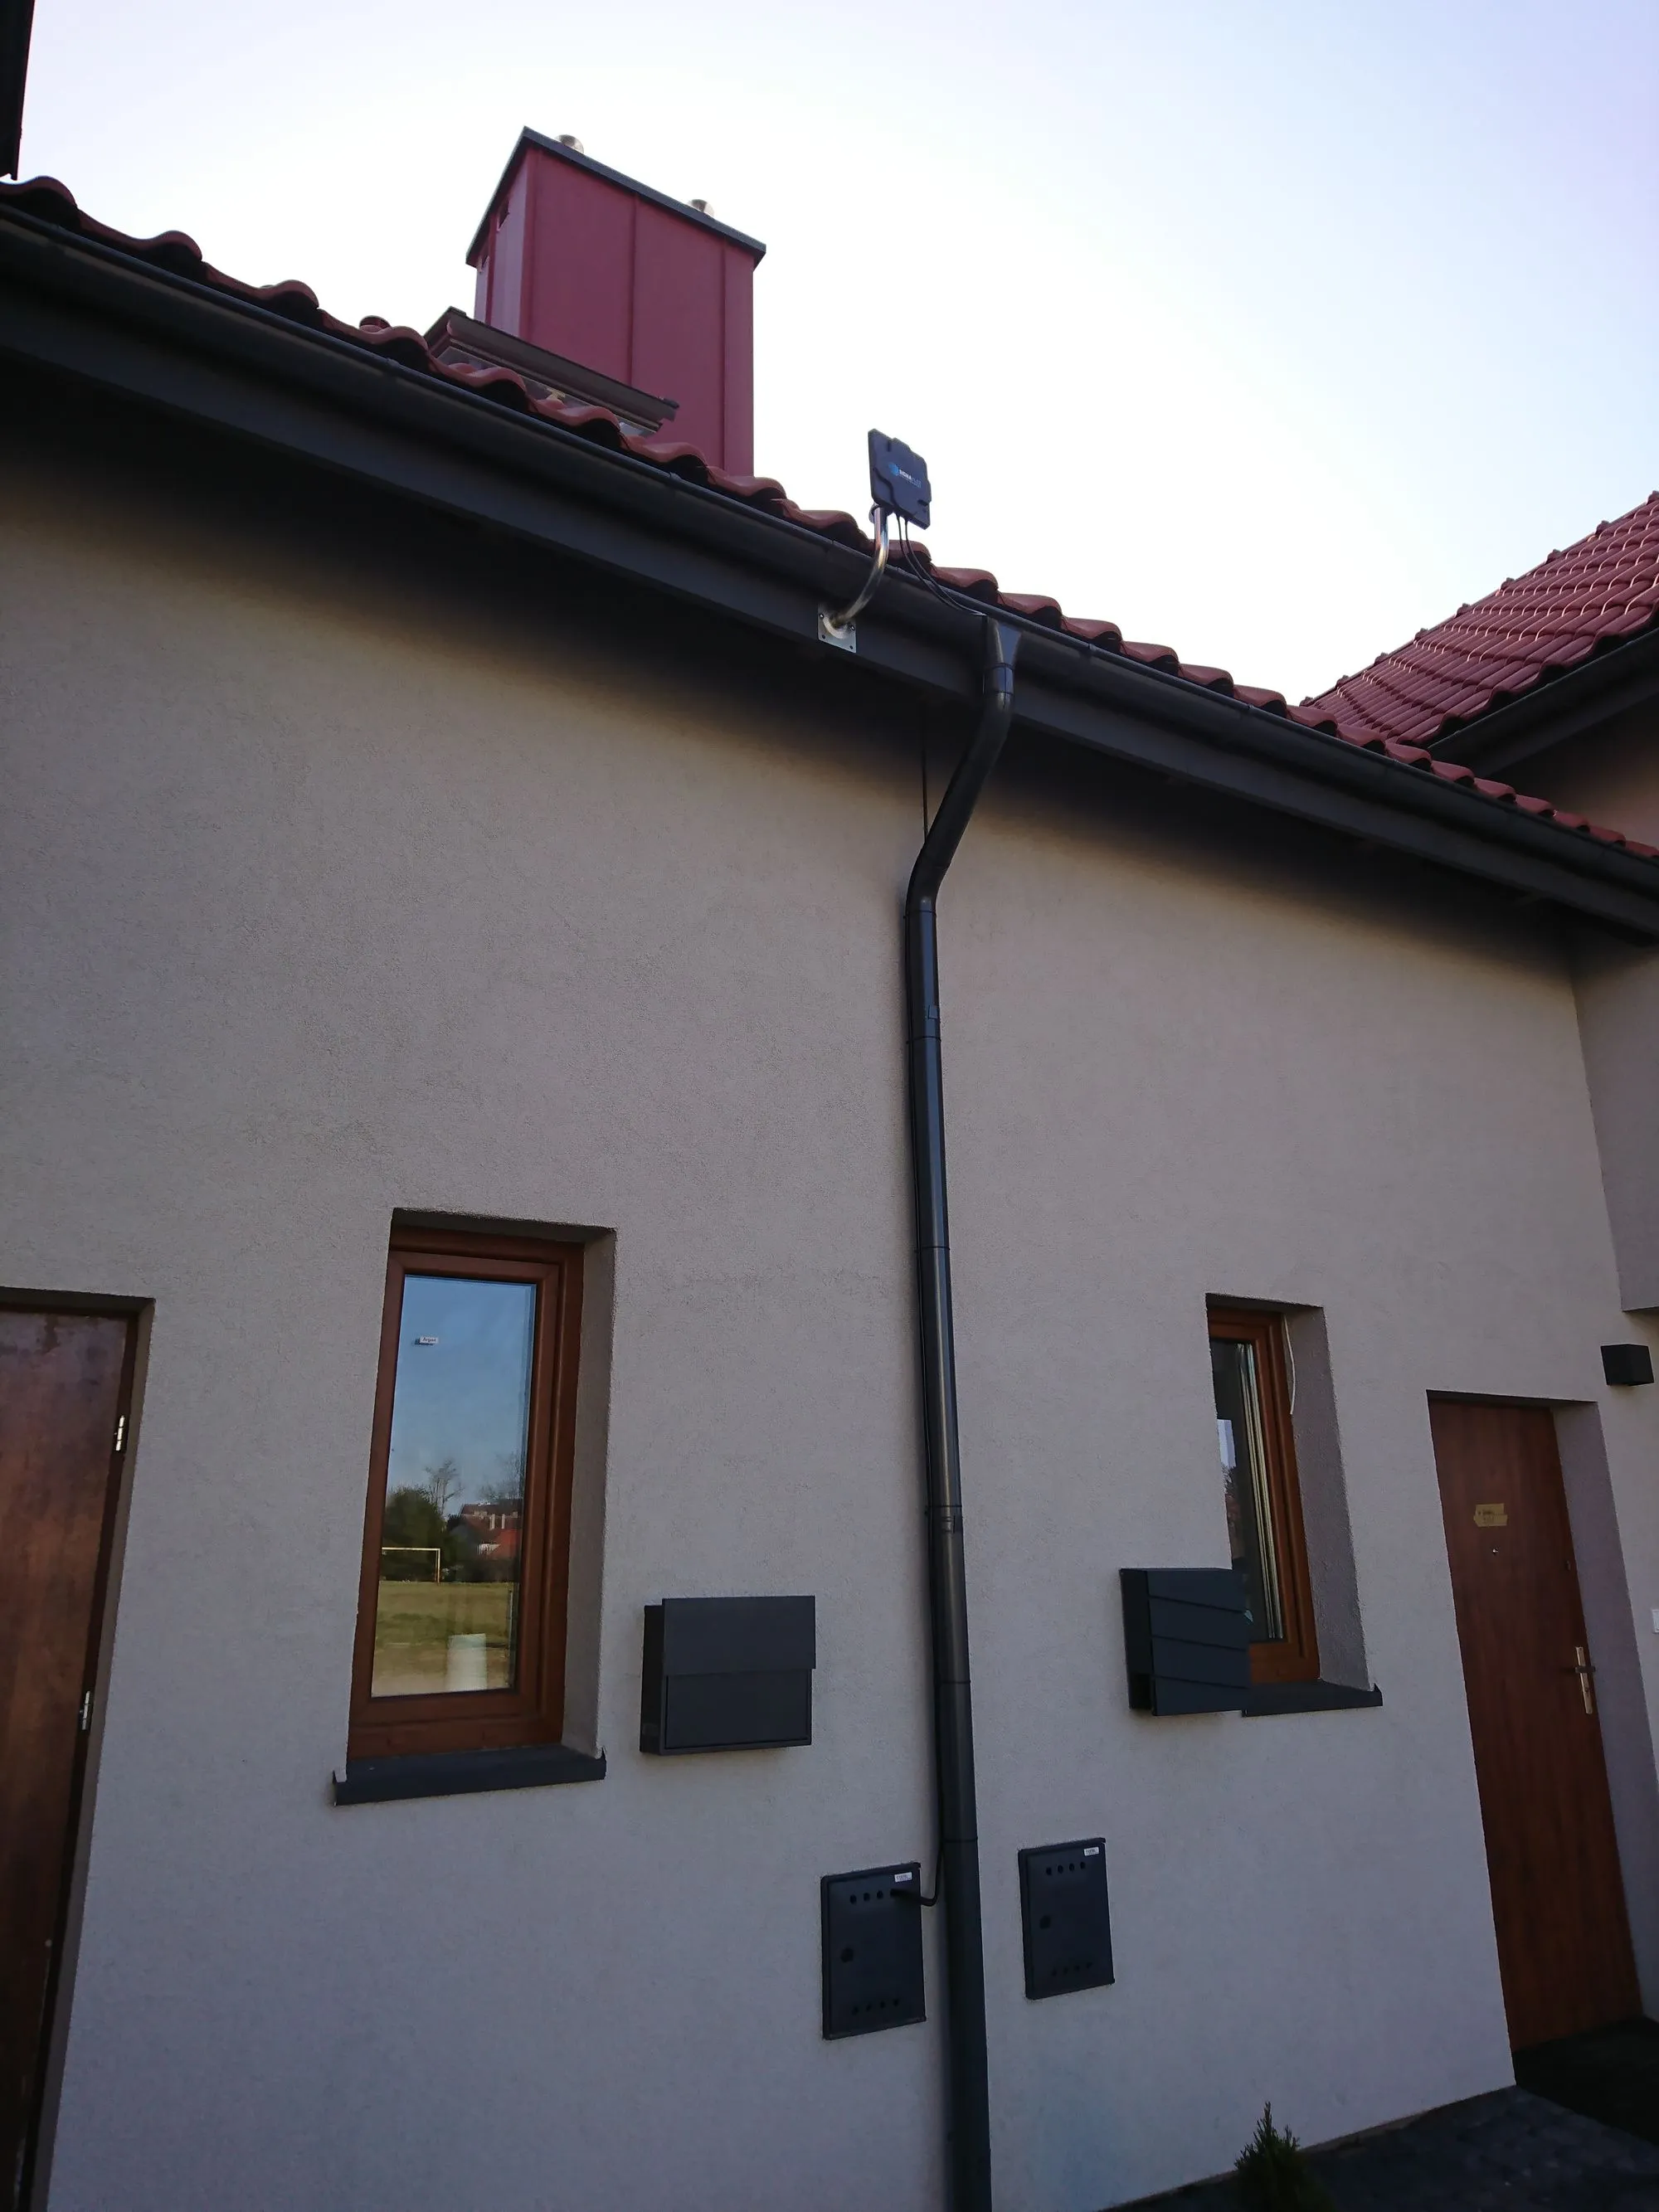 external mobile lte antenna near the roof